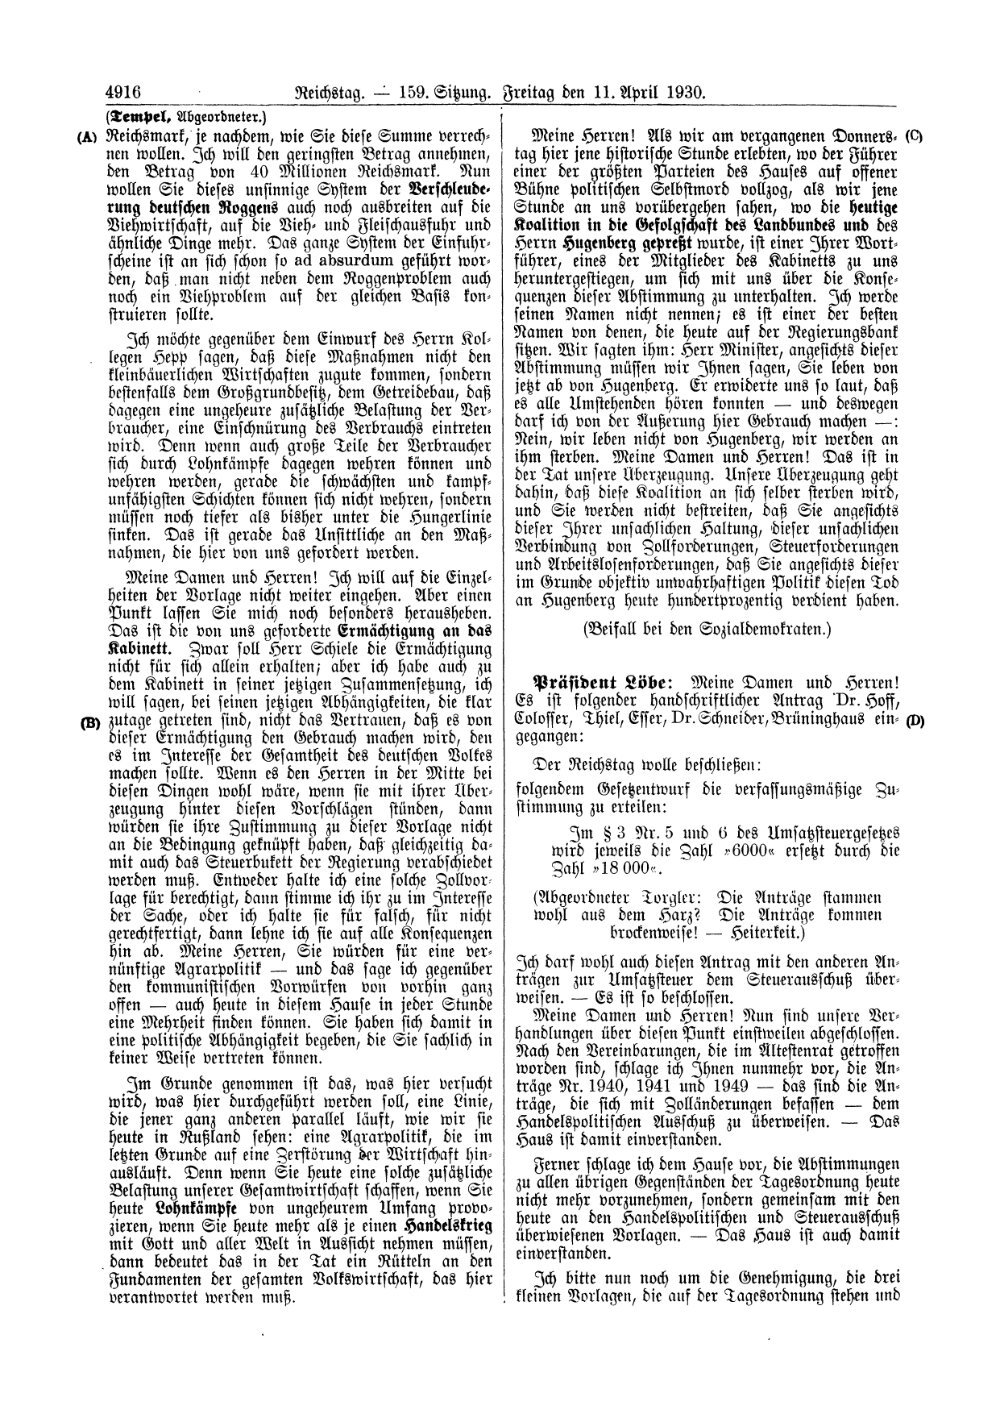 Scan of page 4916